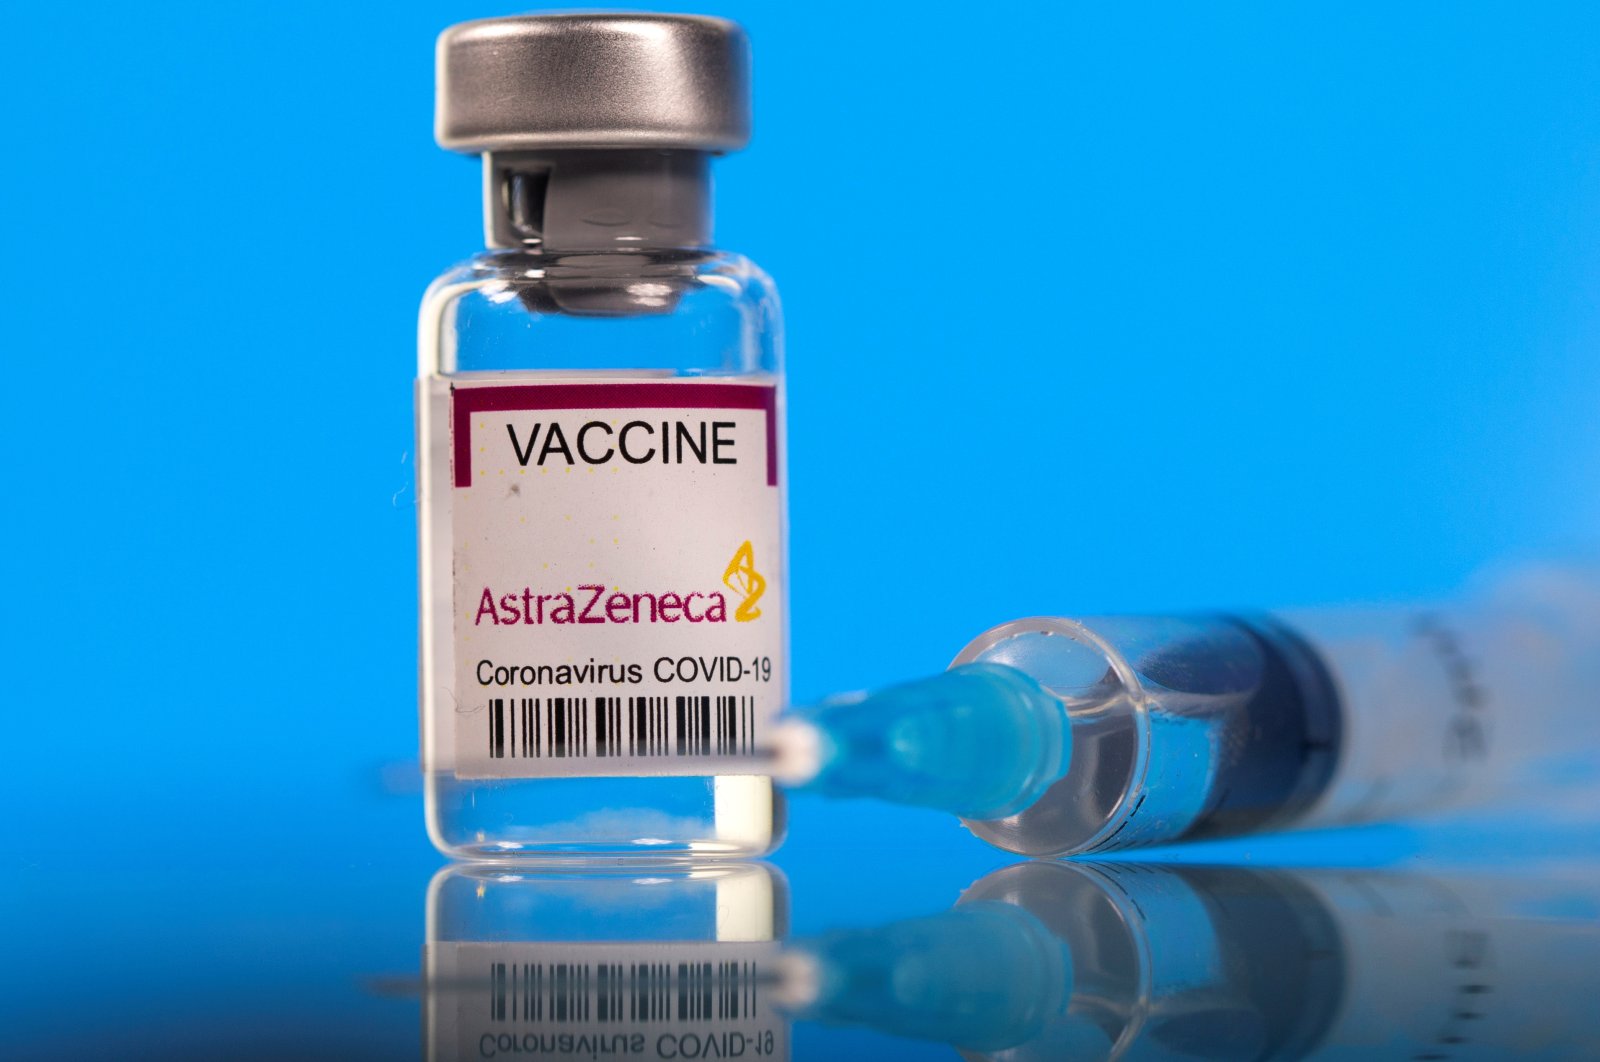 A vial of AstraZeneca's COVID-19 vaccine stands beside a syringe, March 19, 2021. (Reuters Photo)